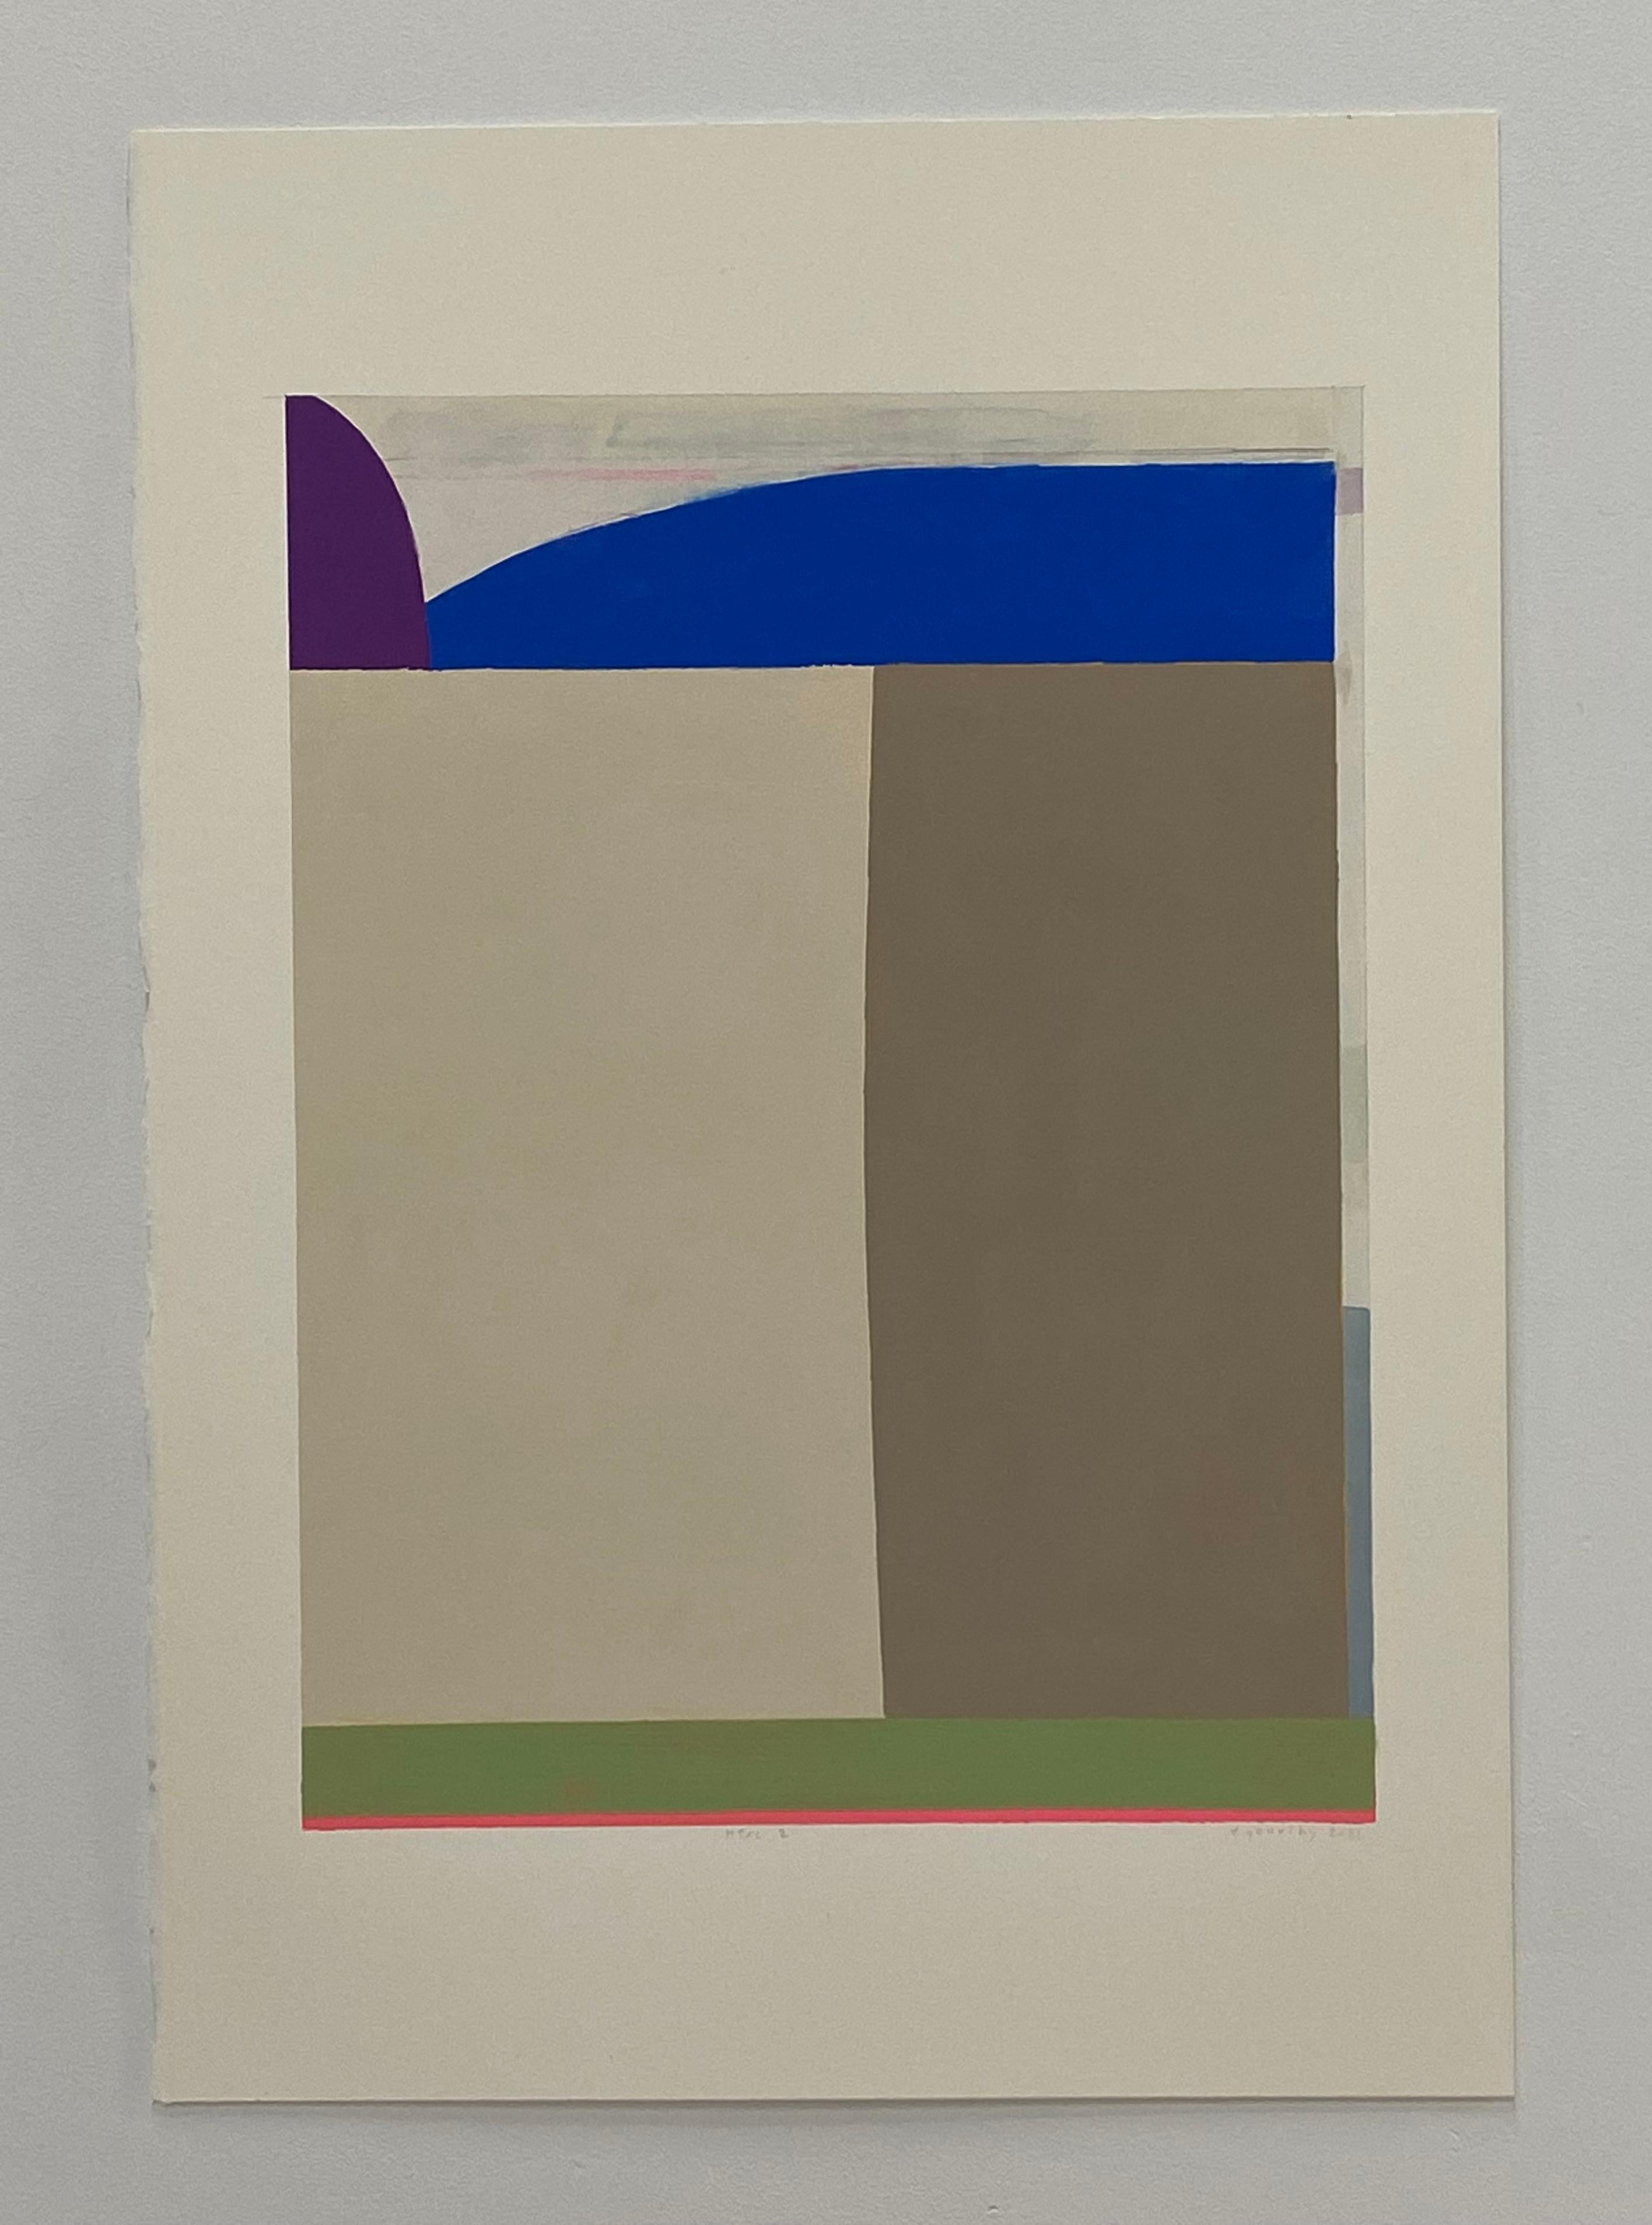 In this painting on paper by Elizabeth Gourlay, clean and precise, carefully ordered blocks of color in shades of navy blue, purple, light green, salmon and beige are bright and luminous against the neutral off-white color of the paper. Signed,